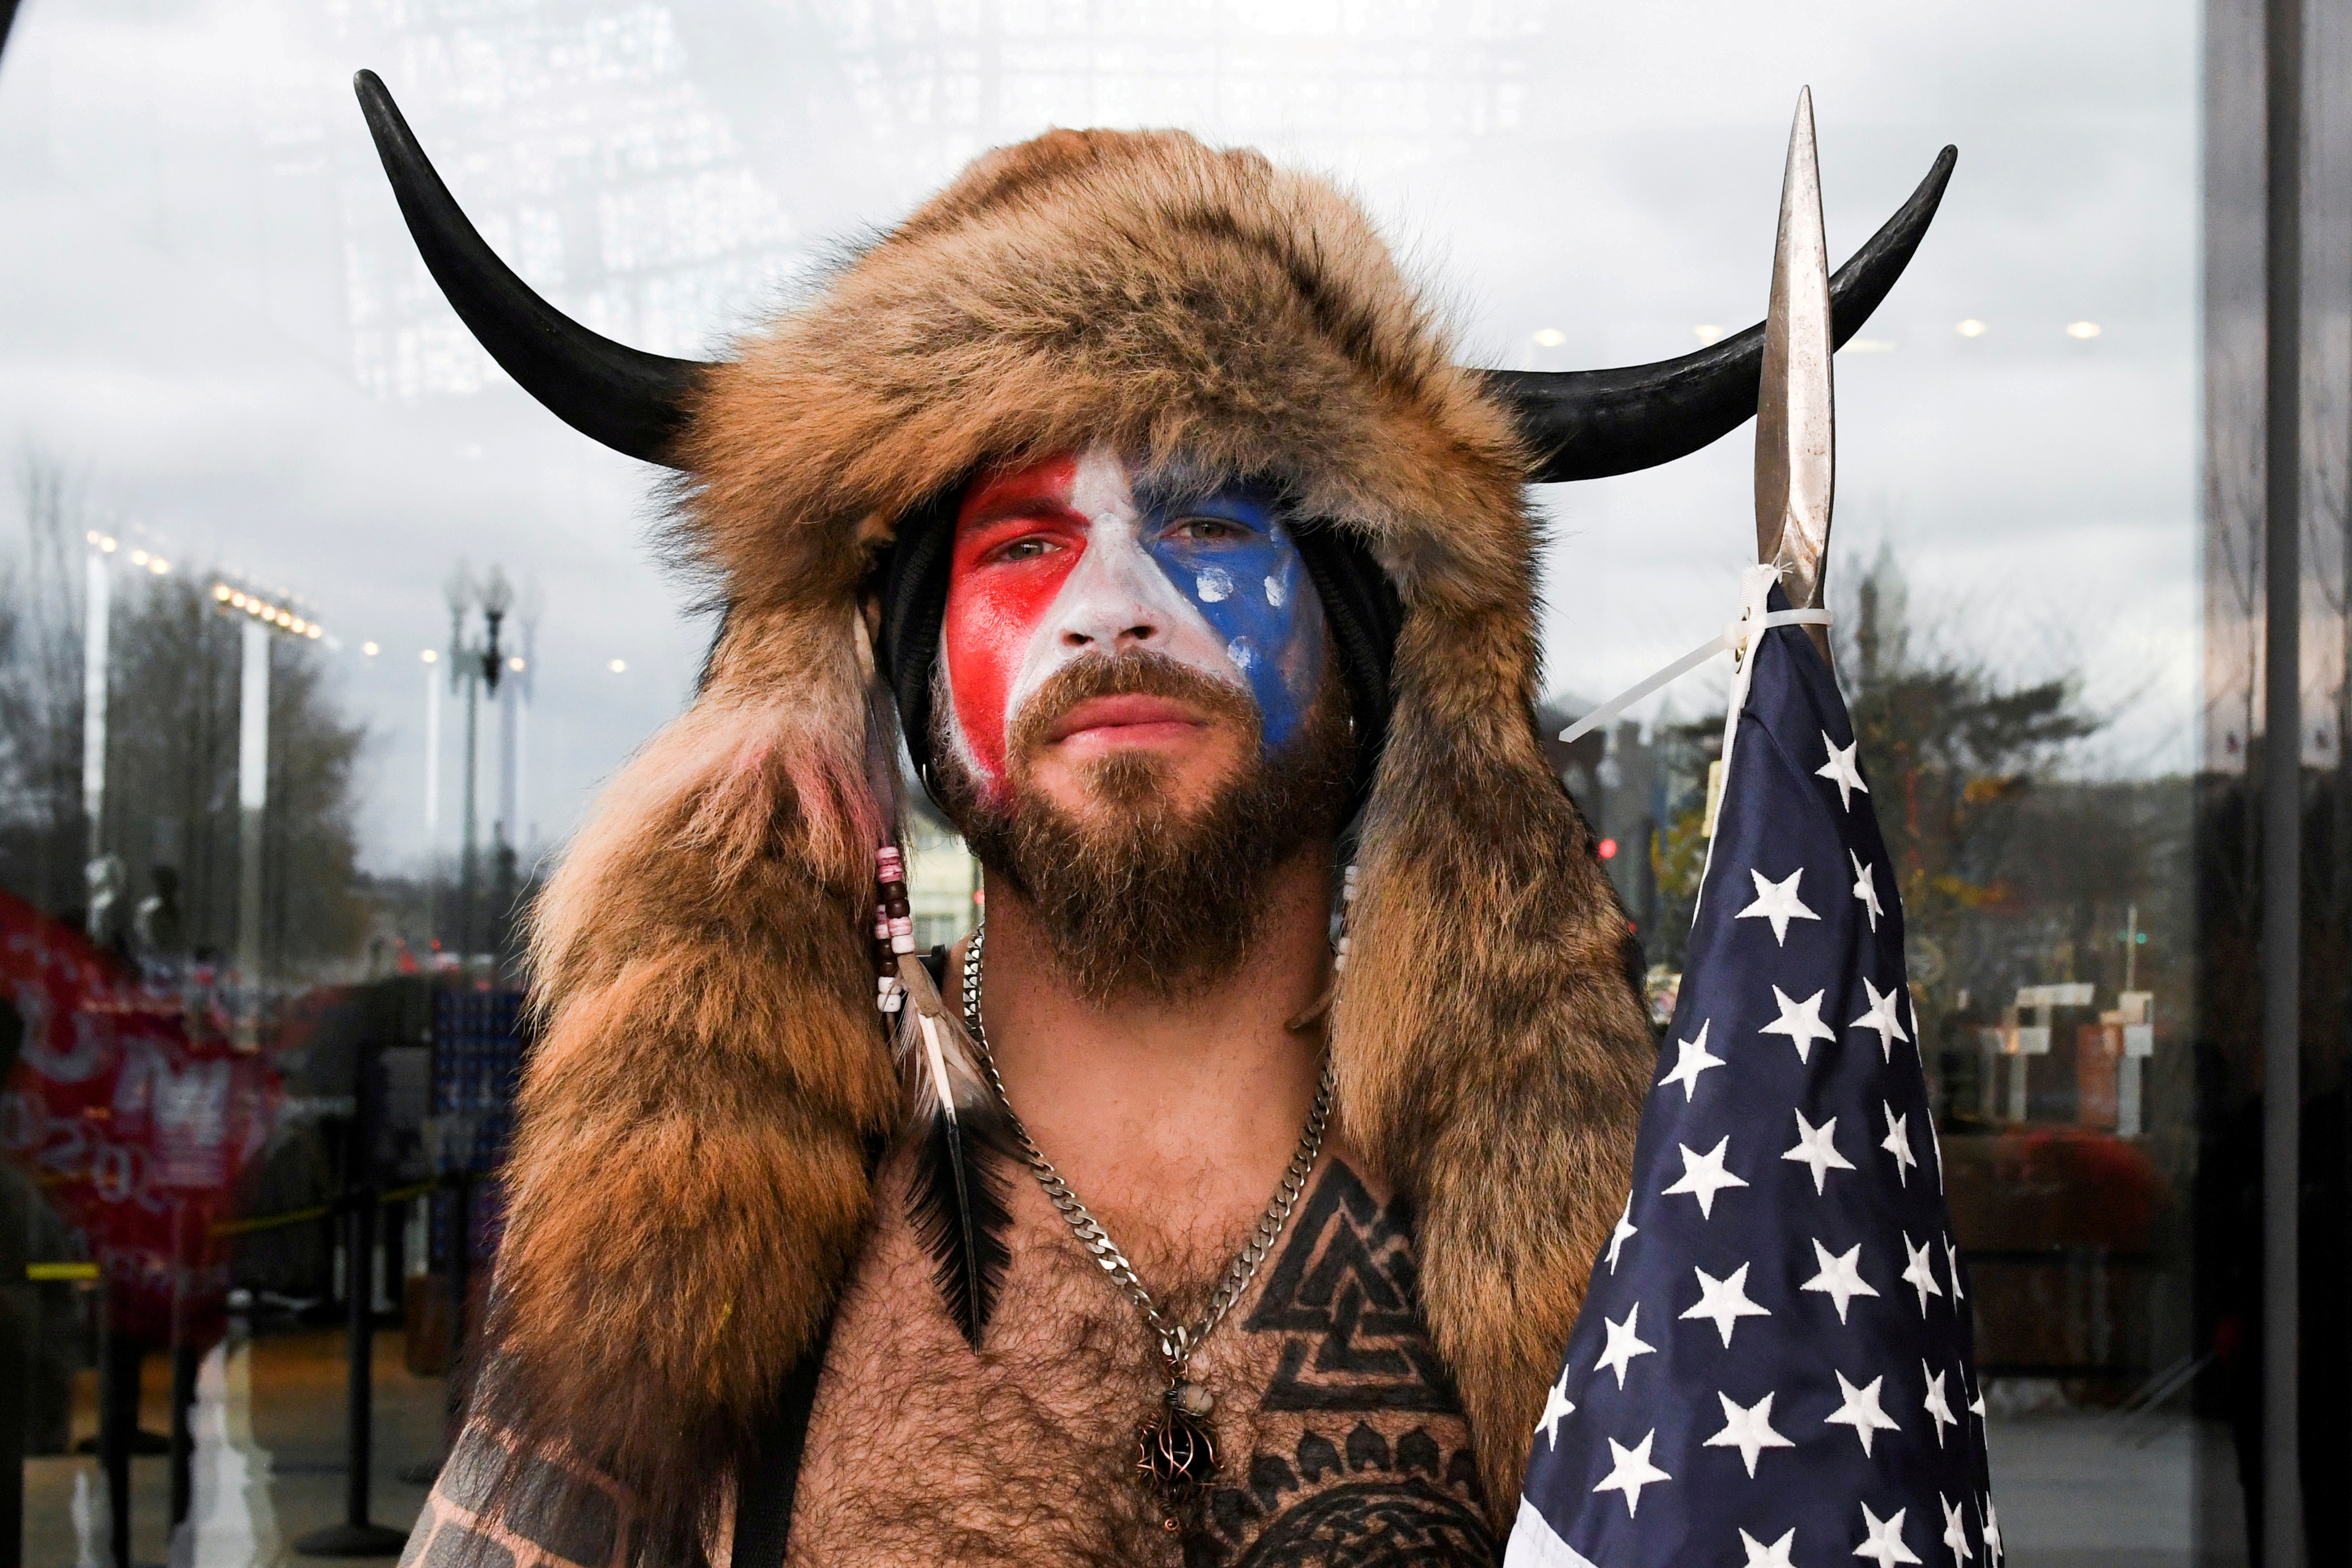 Man poses with his face painted in the colors of the U.S. flag in Washington